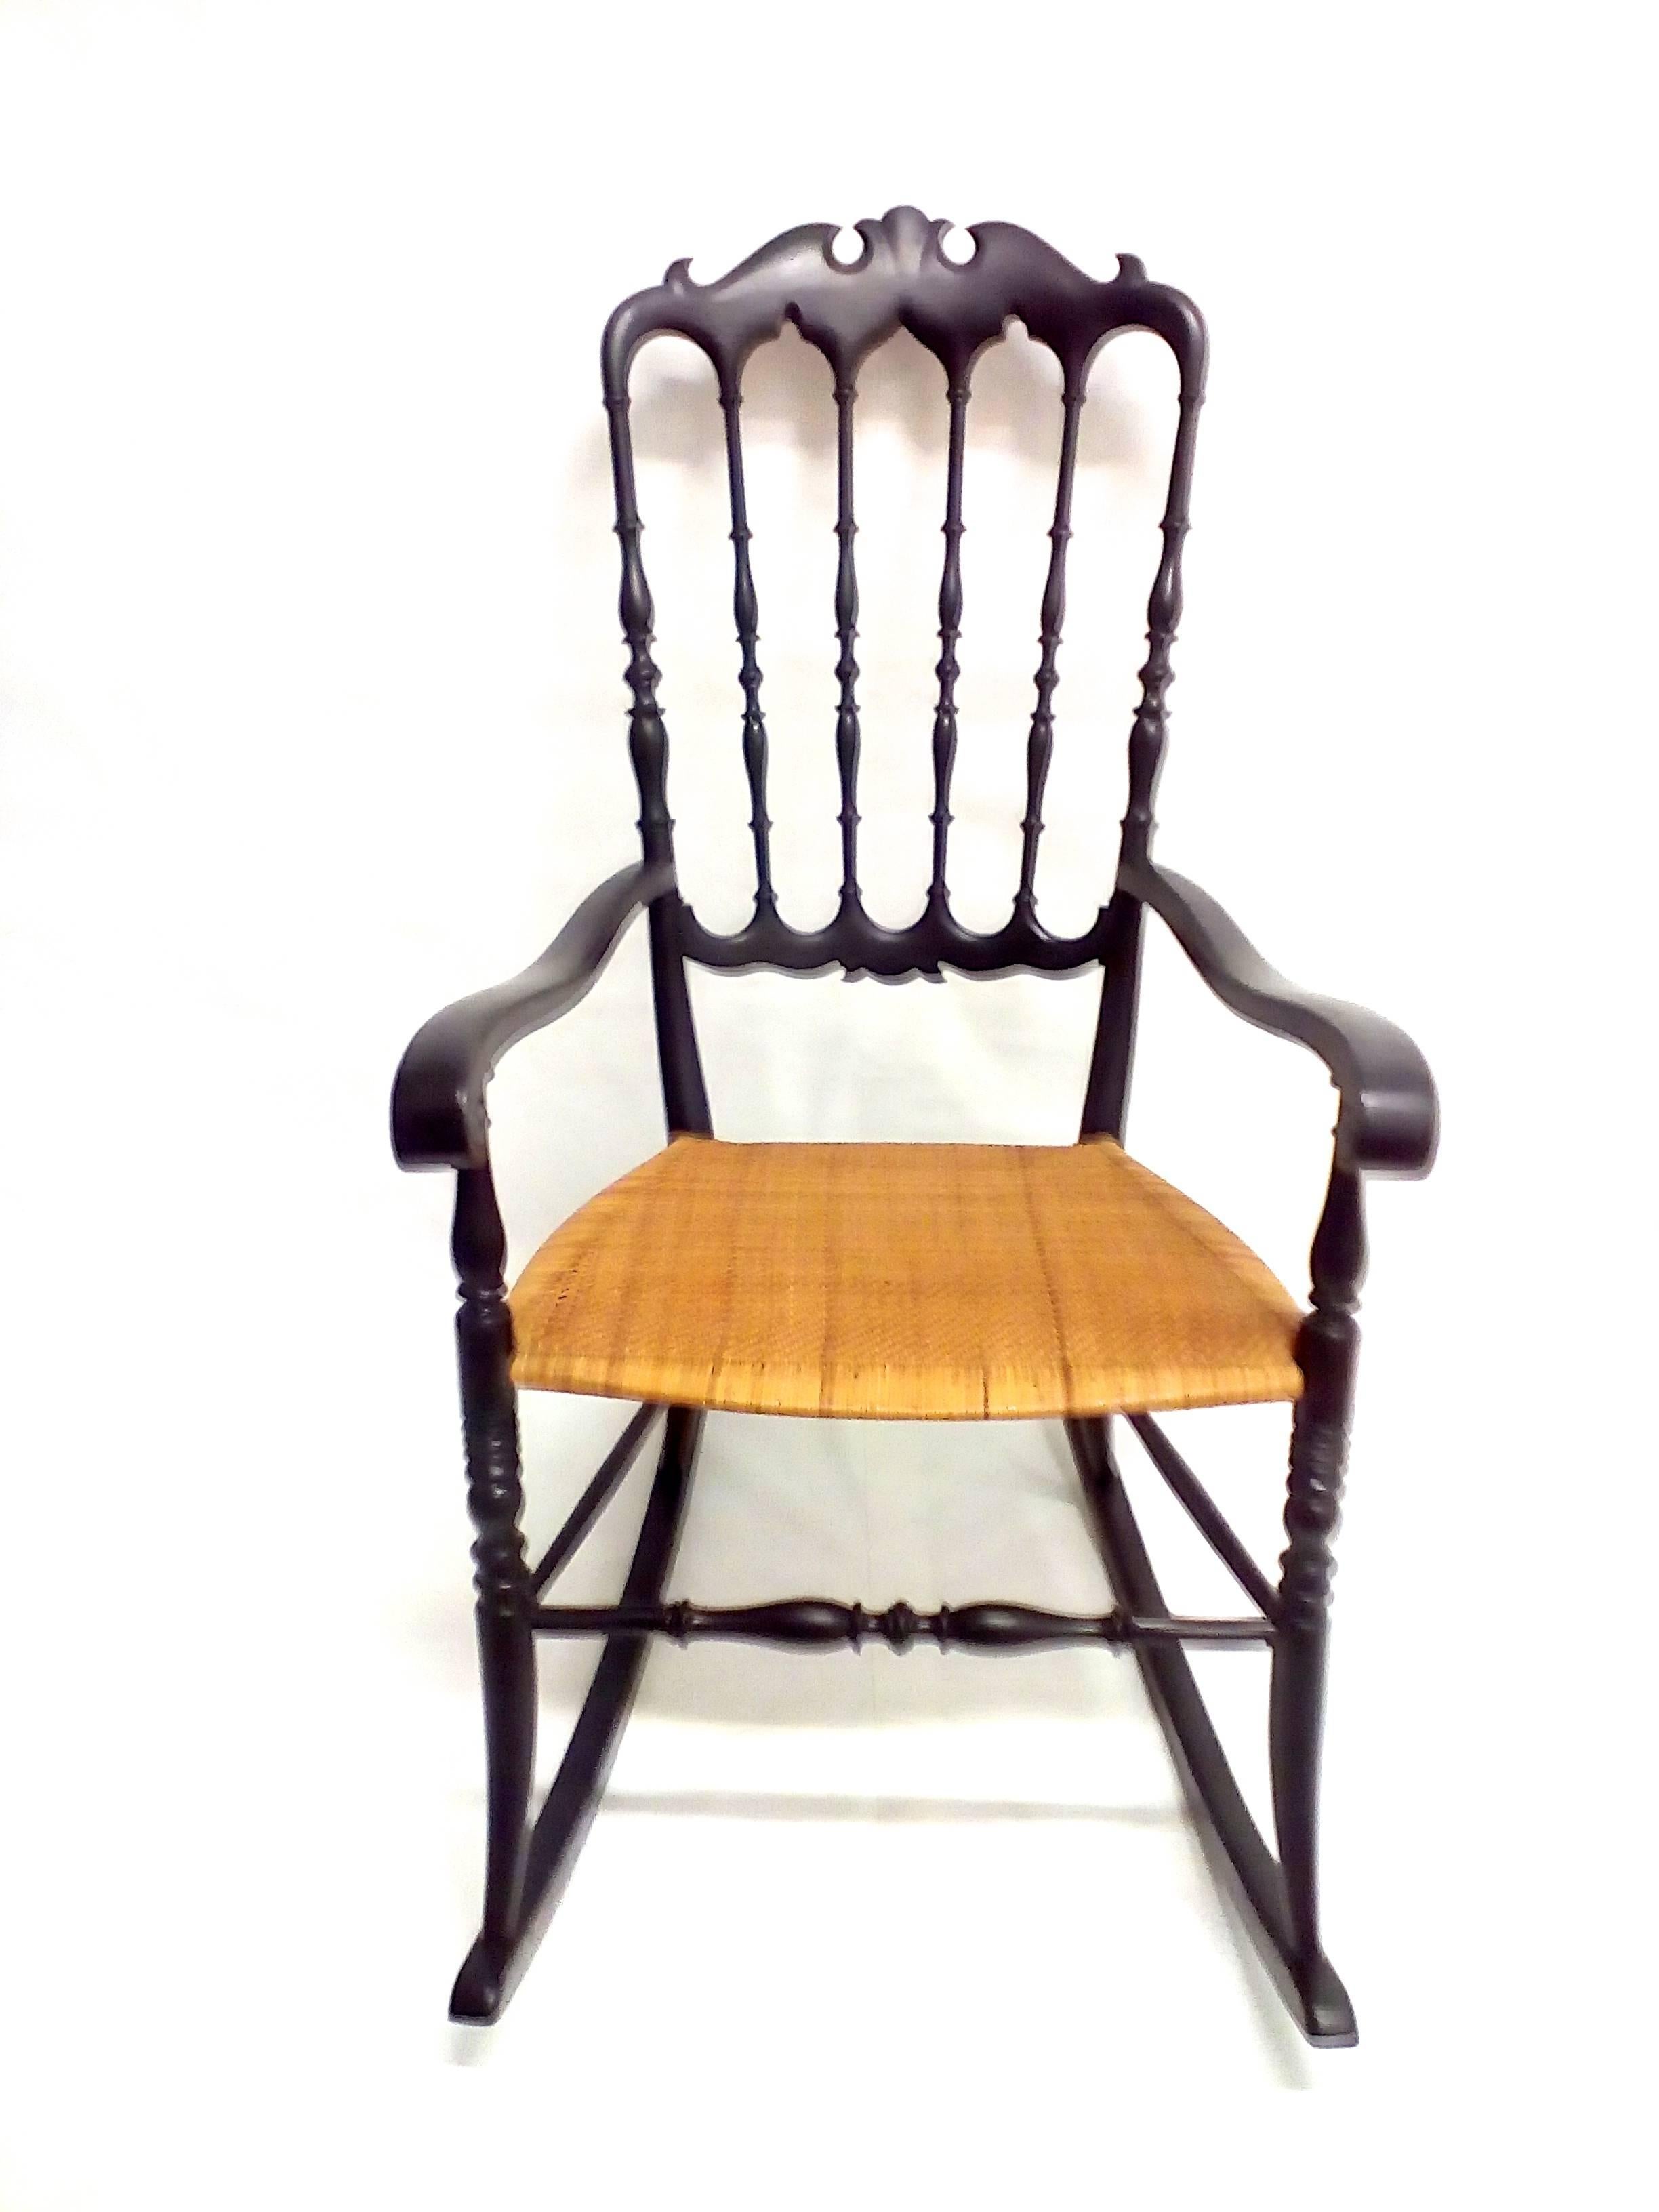 Articulate rocking chair. Black wood and wicker seat with elegant design.